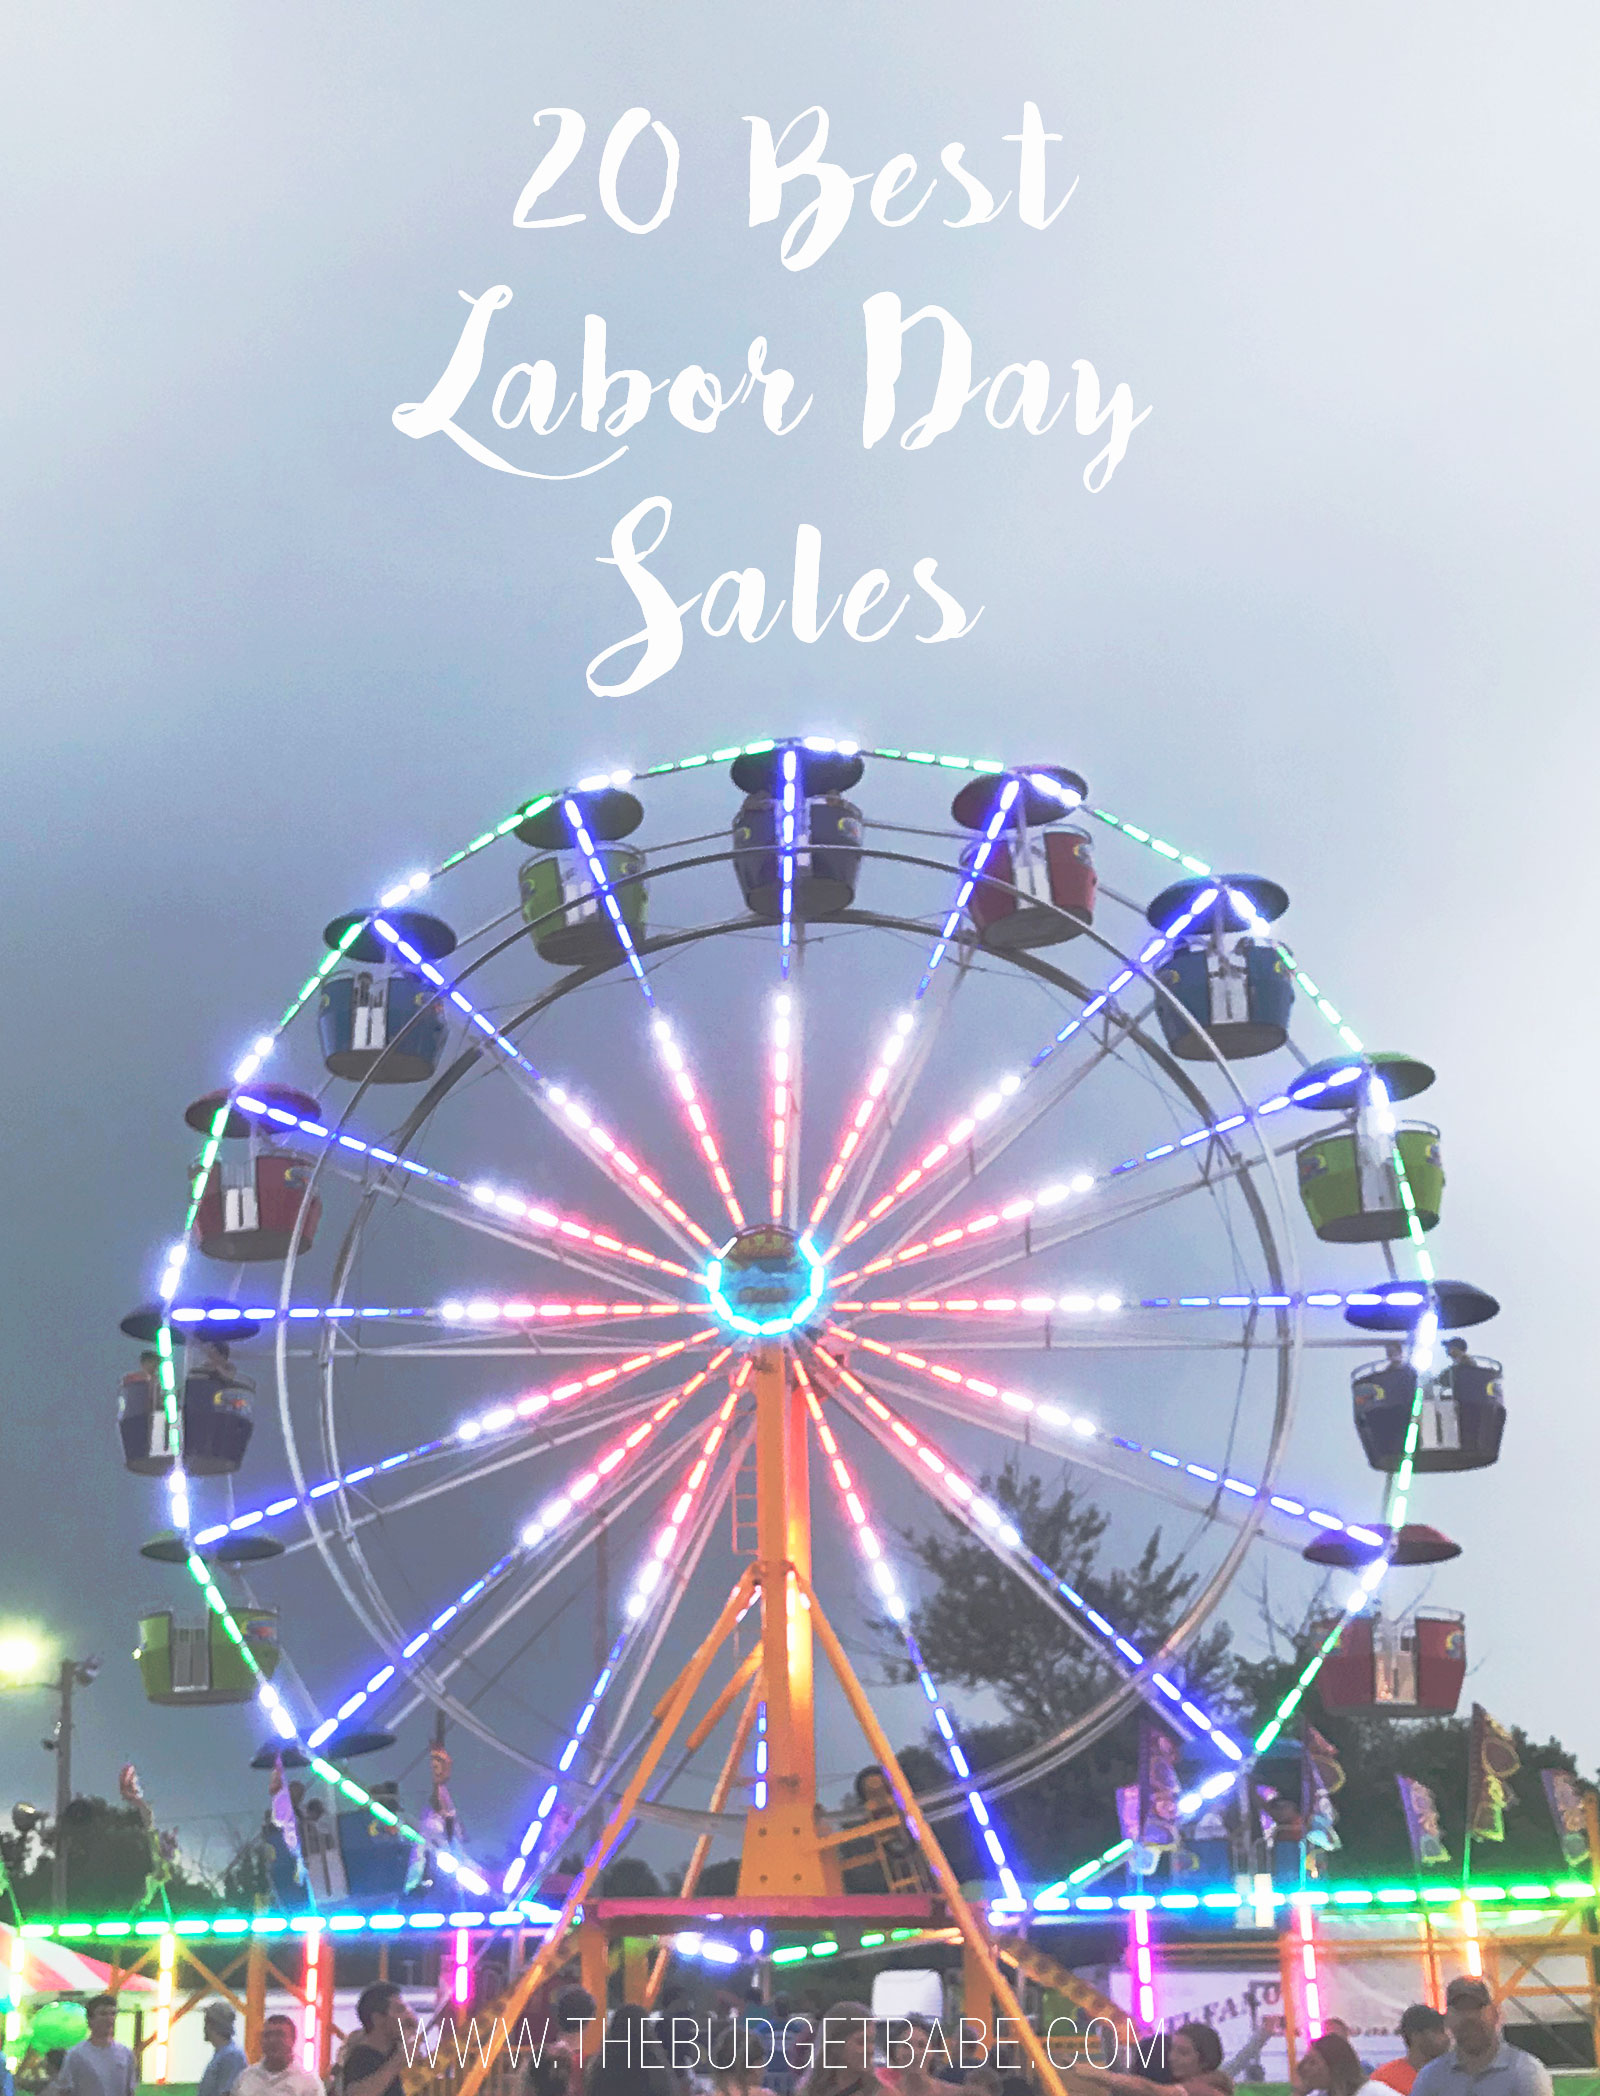 Labor Day Sales Round Up! Lots of stores I didn't think to check